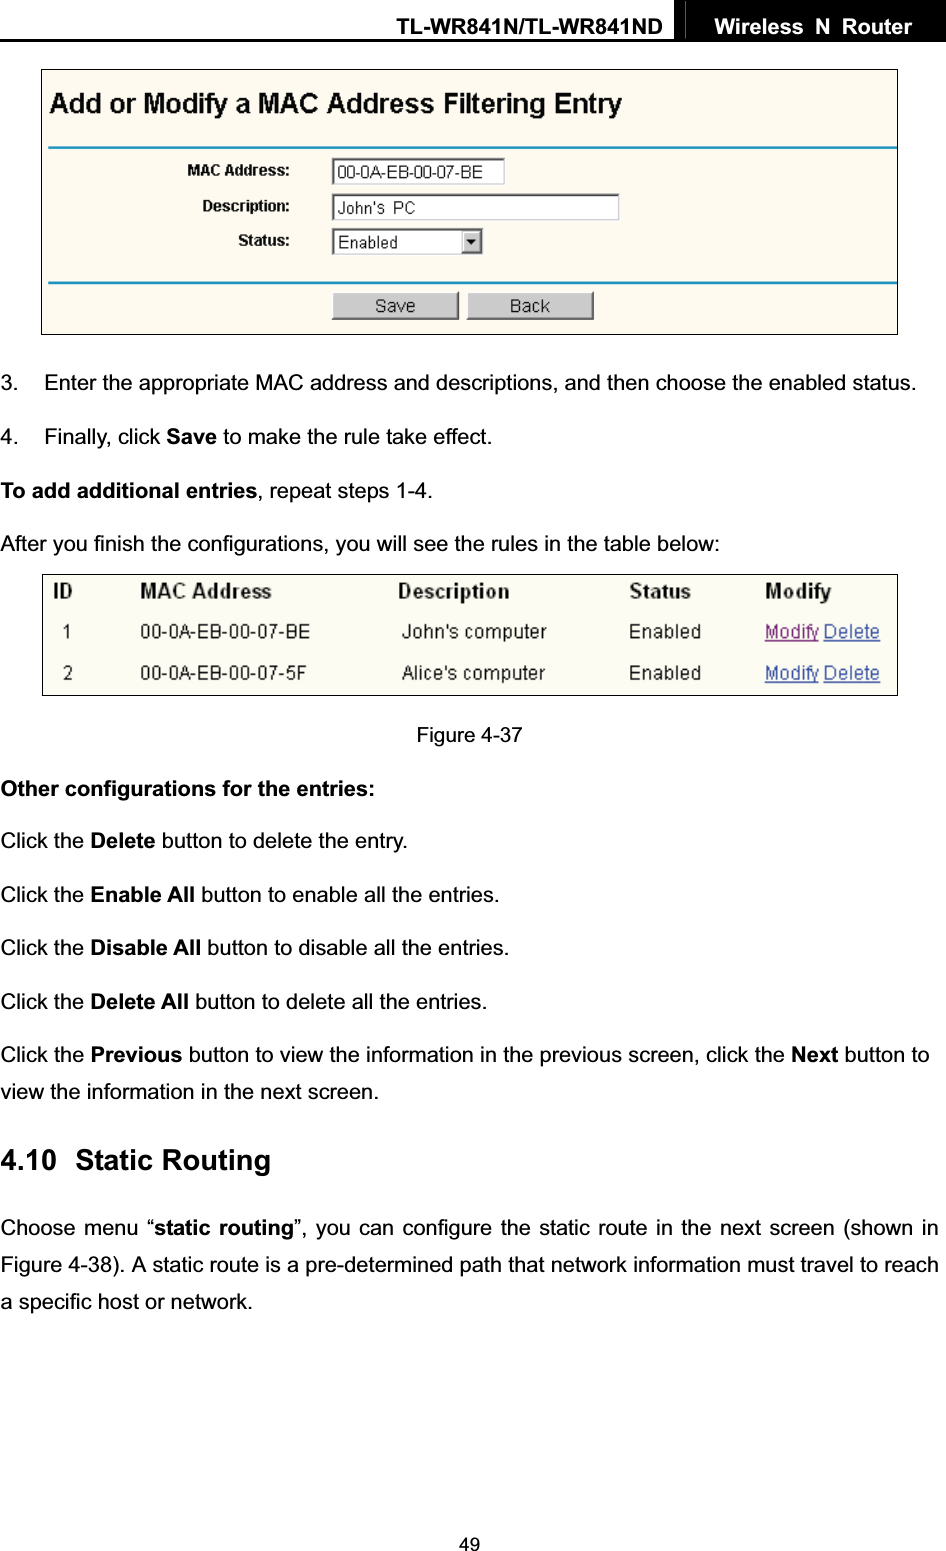 TL-WR841N/TL-WR841ND  Wireless N Router  493.  Enter the appropriate MAC address and descriptions, and then choose the enabled status. 4. Finally, click Save to make the rule take effect. To add additional entries, repeat steps 1-4. After you finish the configurations, you will see the rules in the table below: Figure 4-37 Other configurations for the entries: Click the Delete button to delete the entry. Click the Enable All button to enable all the entries. Click the Disable All button to disable all the entries. Click the Delete All button to delete all the entries. Click the Previous button to view the information in the previous screen, click the Next button to view the information in the next screen. 4.10 Static Routing Choose menu “static routing”, you can configure the static route in the next screen (shown in Figure 4-38). A static route is a pre-determined path that network information must travel to reach a specific host or network. 